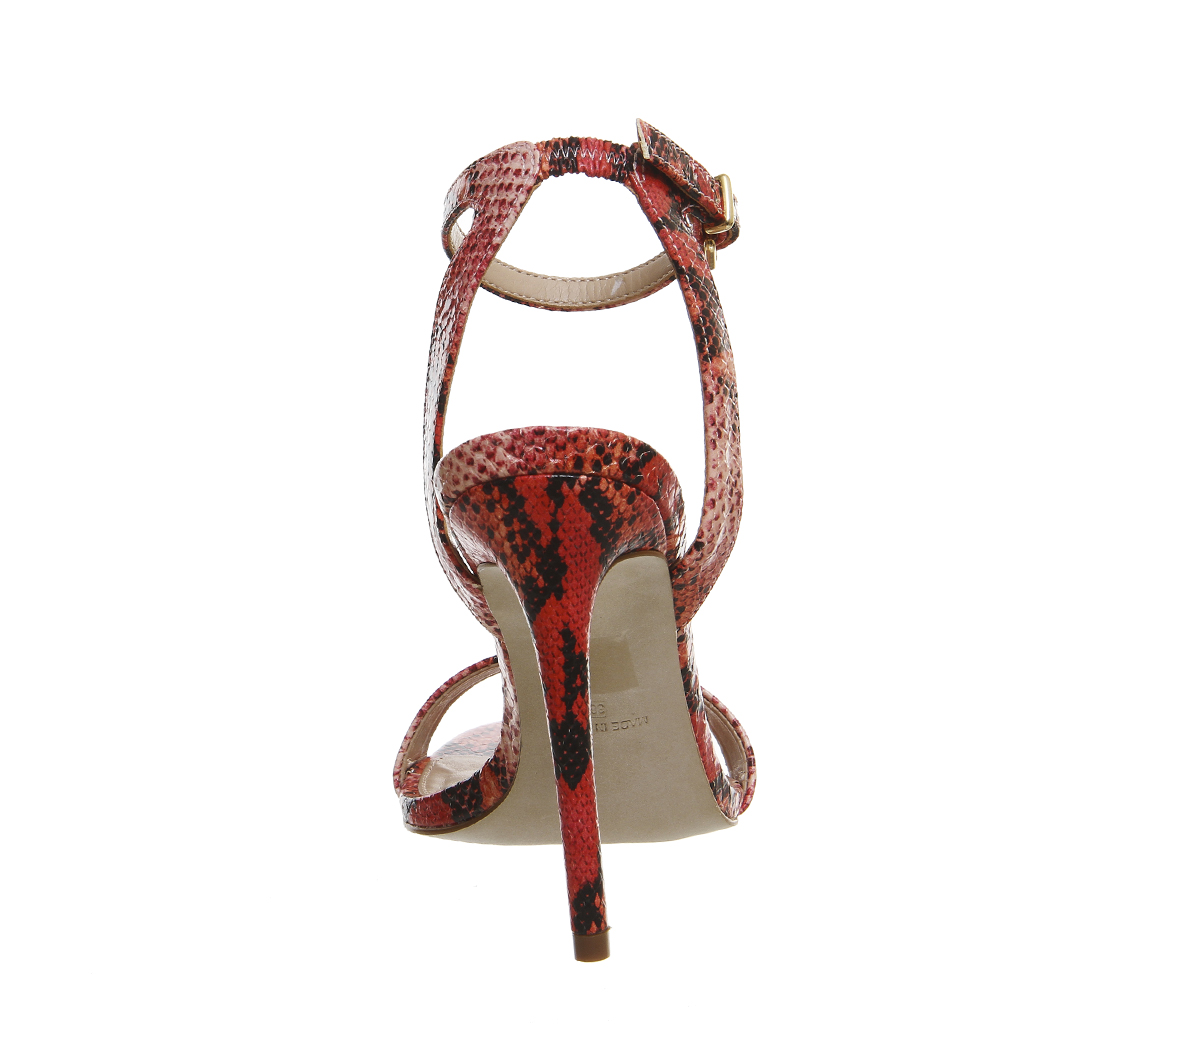 OFFICE Alana Single Sole Sandals Bright Snake Leather - High Heels